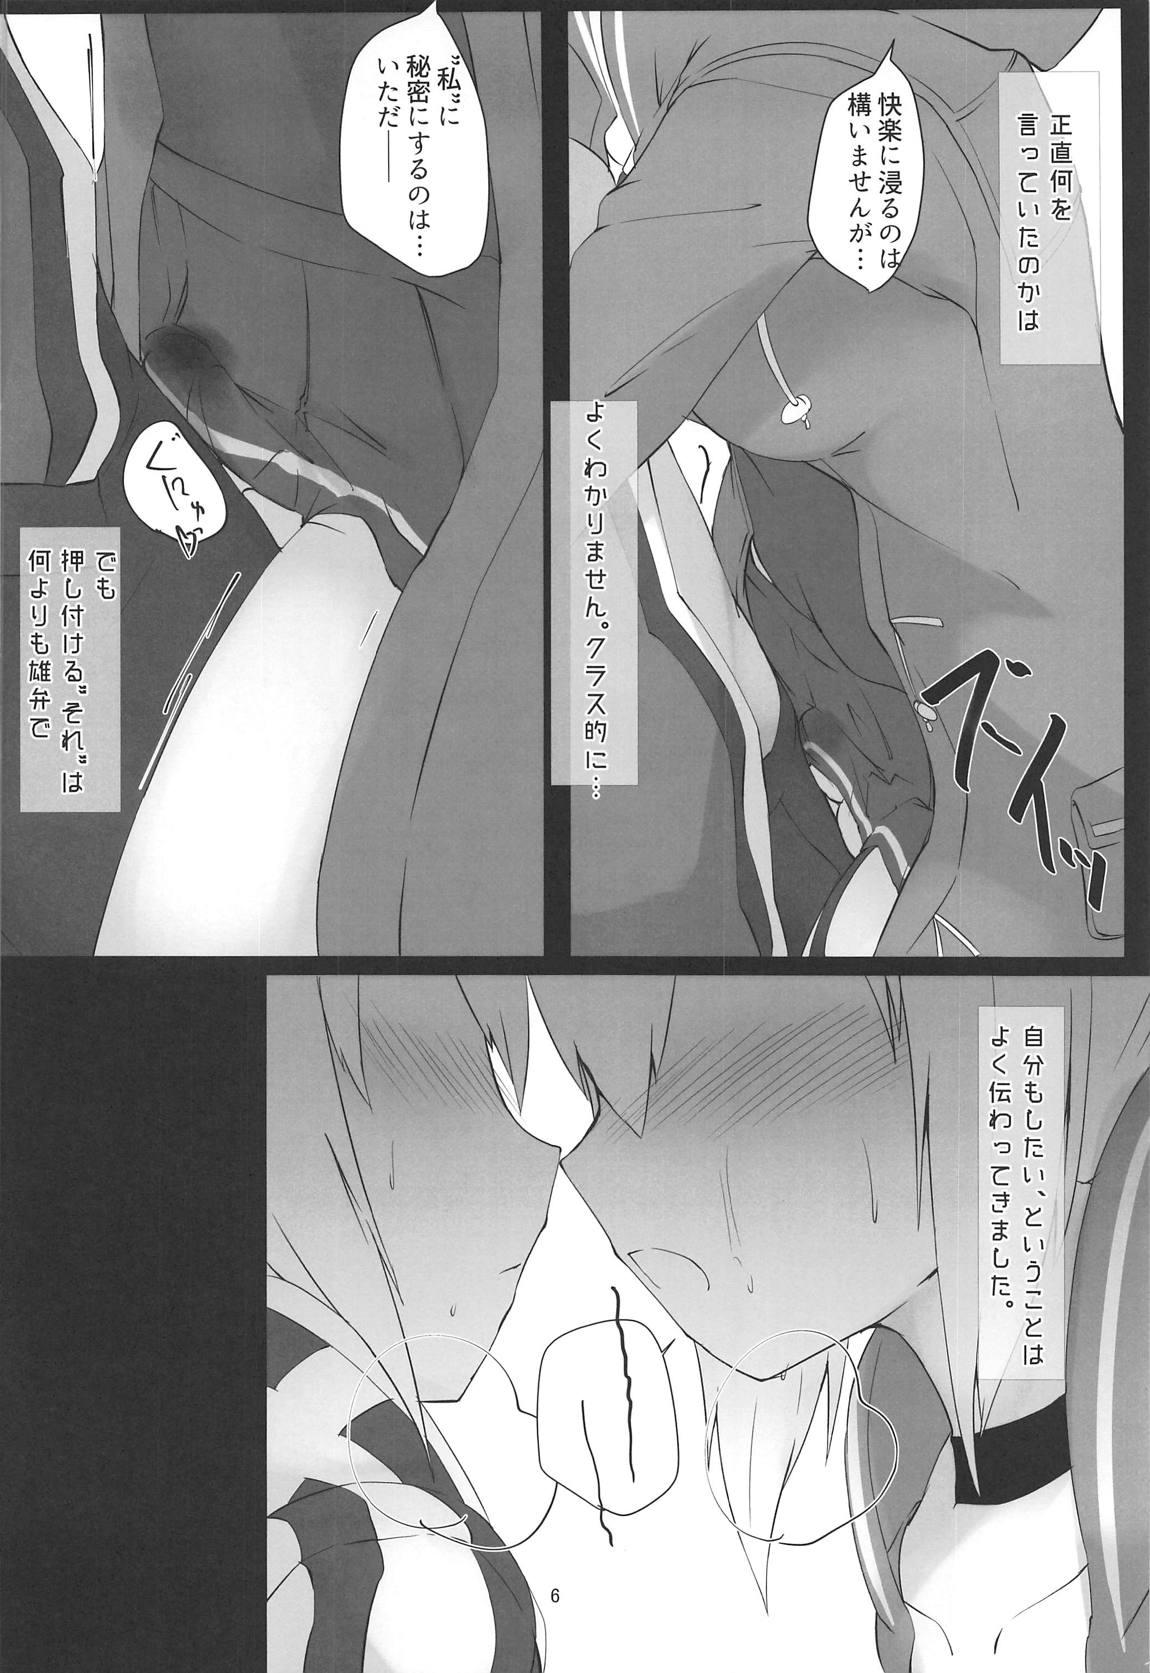 Pussy Eating eXXpose herself+ - Fate grand order Sweet - Page 5